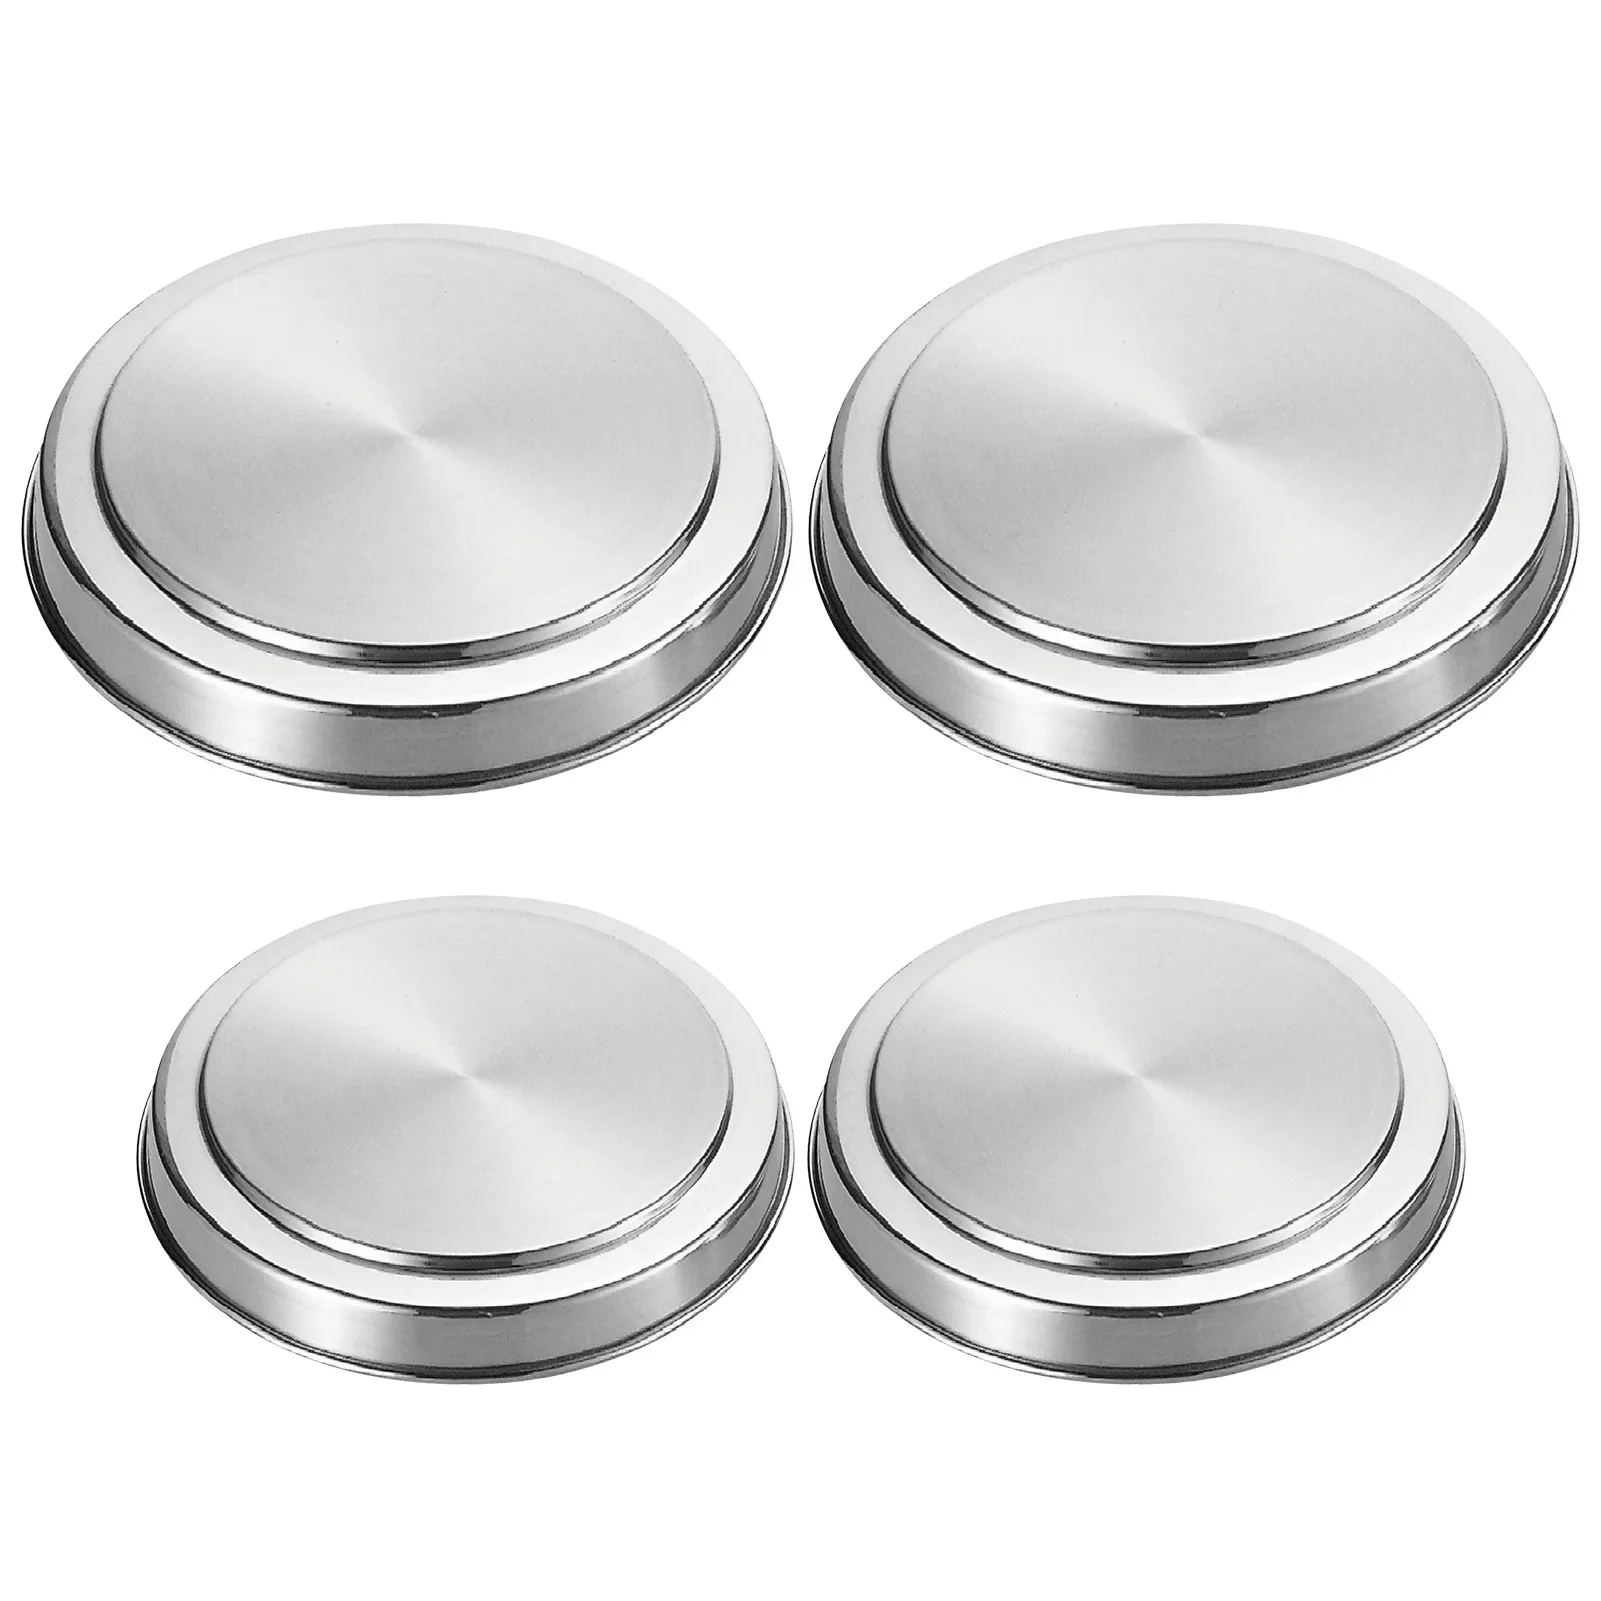 4pcs Electric Stove Burner Covers Home Kitchen Accessories Round